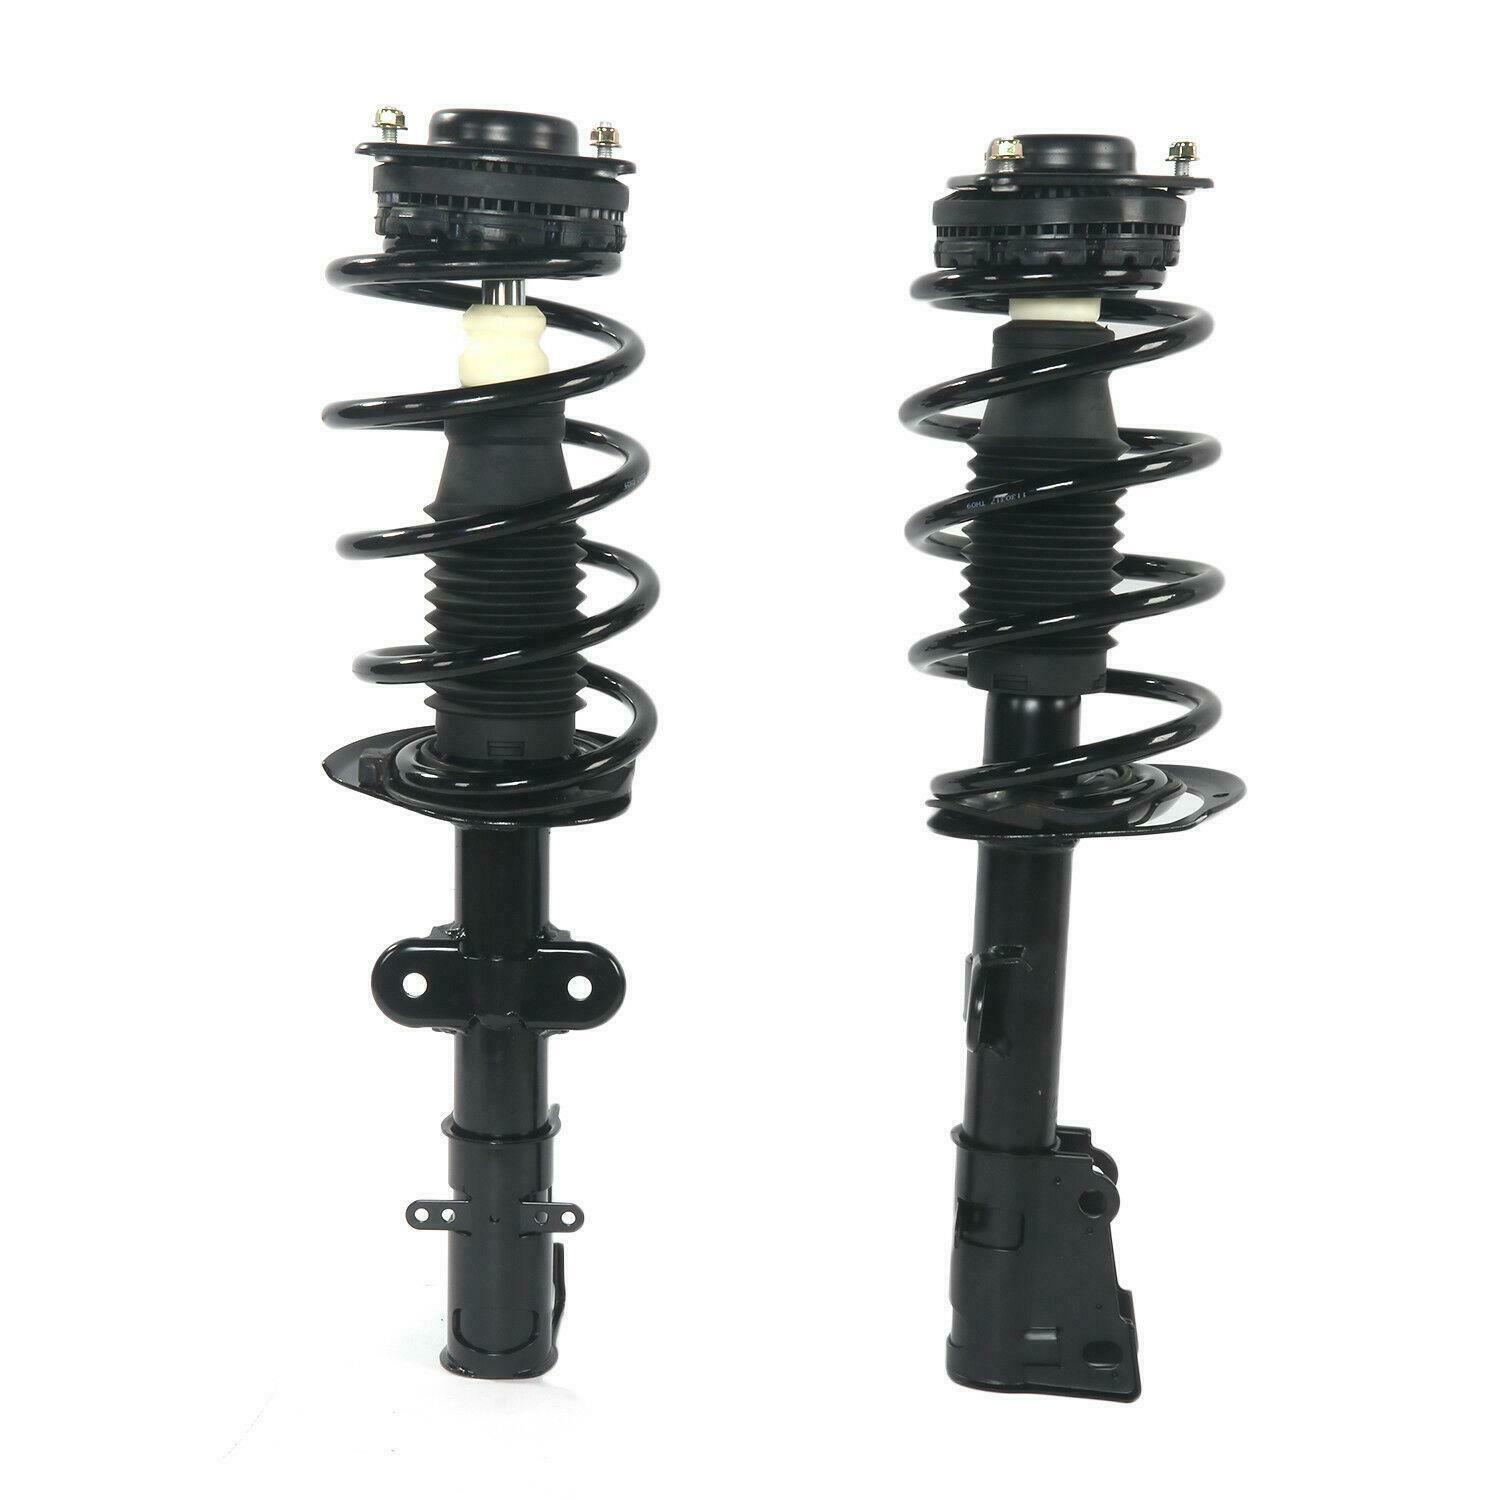 Complete Struts Assembly Shocks Quick Install For 2008-2014 Dodge Grand Caravan Front Pair - The Heavy Duty Shocks For Dodge Grand Caravan